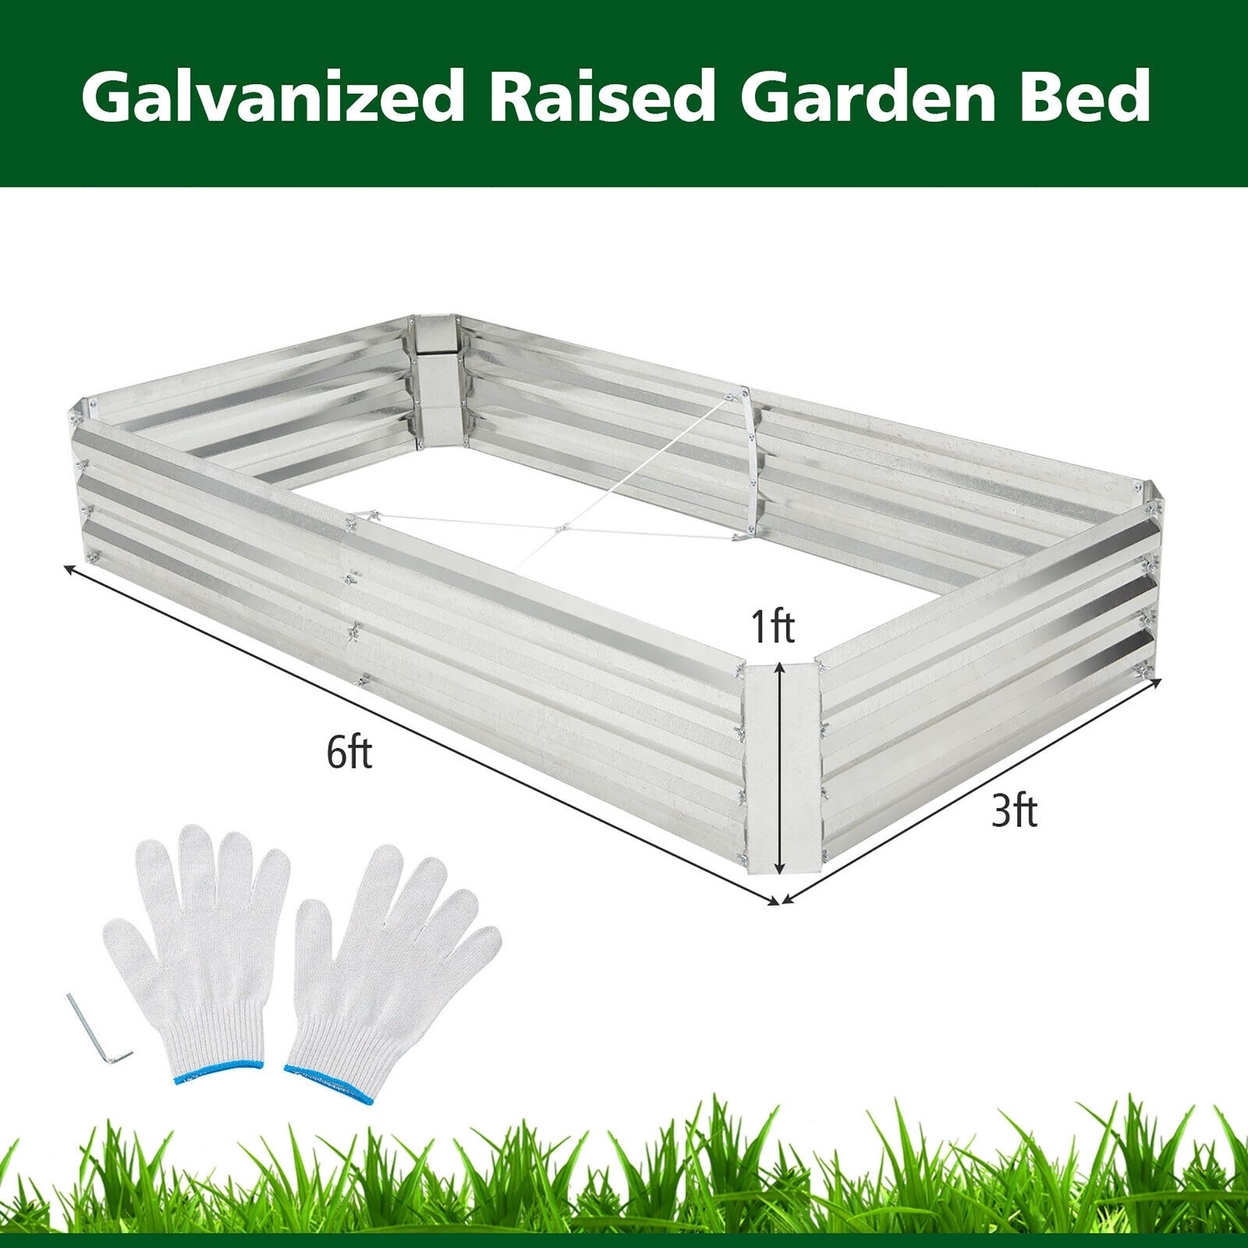 6 X 3 X 1FT Galvanized Raised Garden Bed Heavy-Duty Elevated Rectangle Plant Box